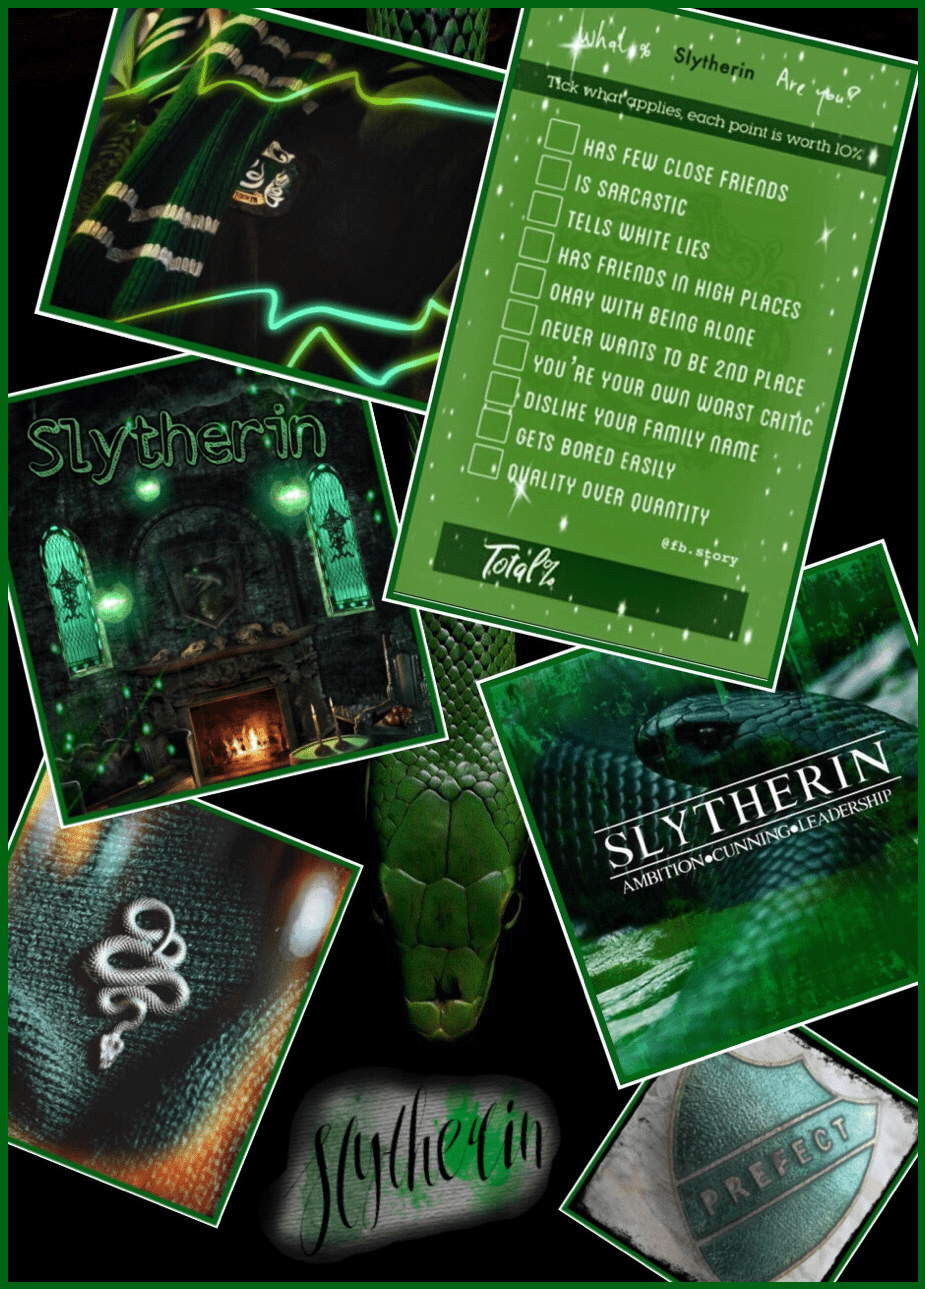 A collage of Slytherin house images, including a snake, a green and black background, and a checklist of qualities of the house. - Slytherin